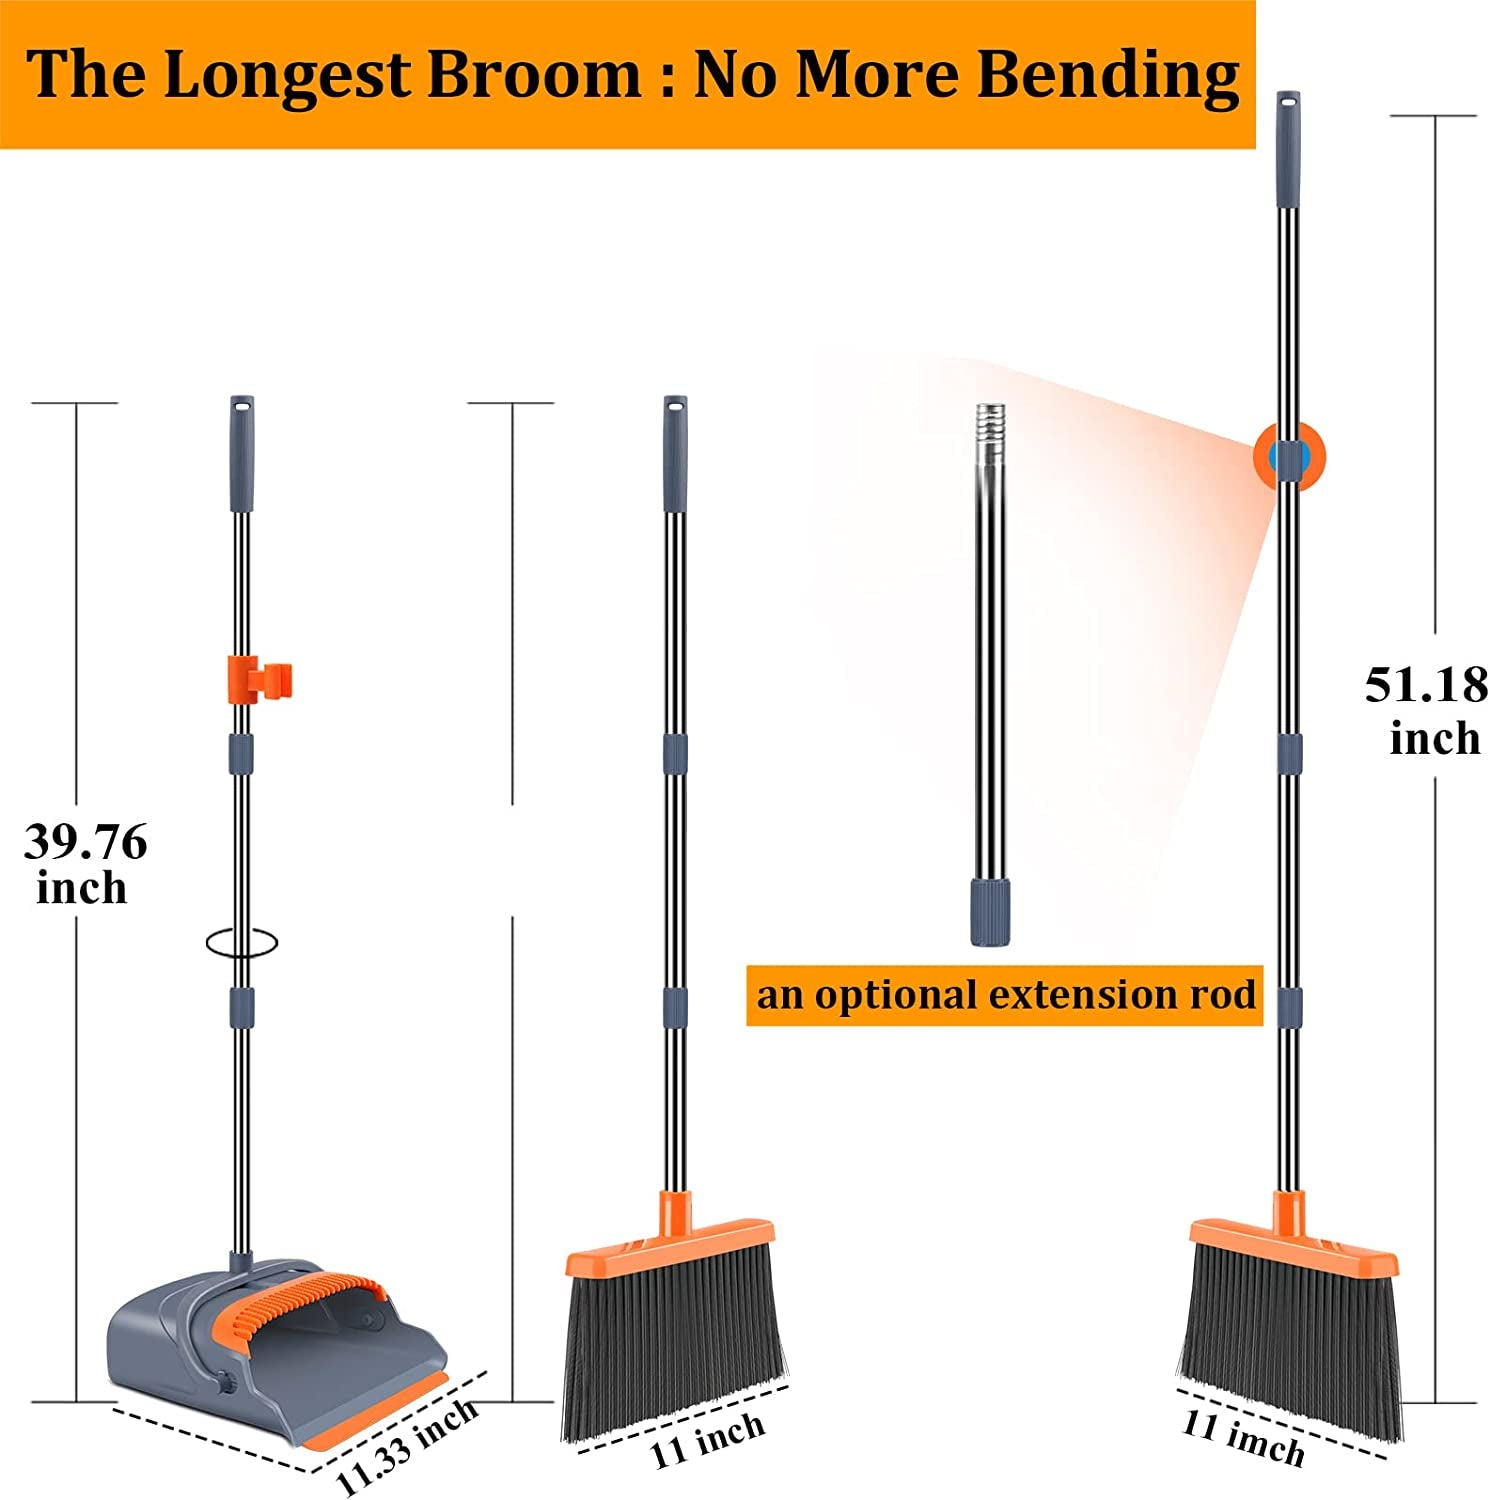 Upgrade Broom and Dustpan Set, Self-Cleaning with Dustpan Teeth, Ideal for Dog Cat Pets Home Use, Super Long Handle Upright Stand up Broom and Dustpan Set (Gray&Orange)